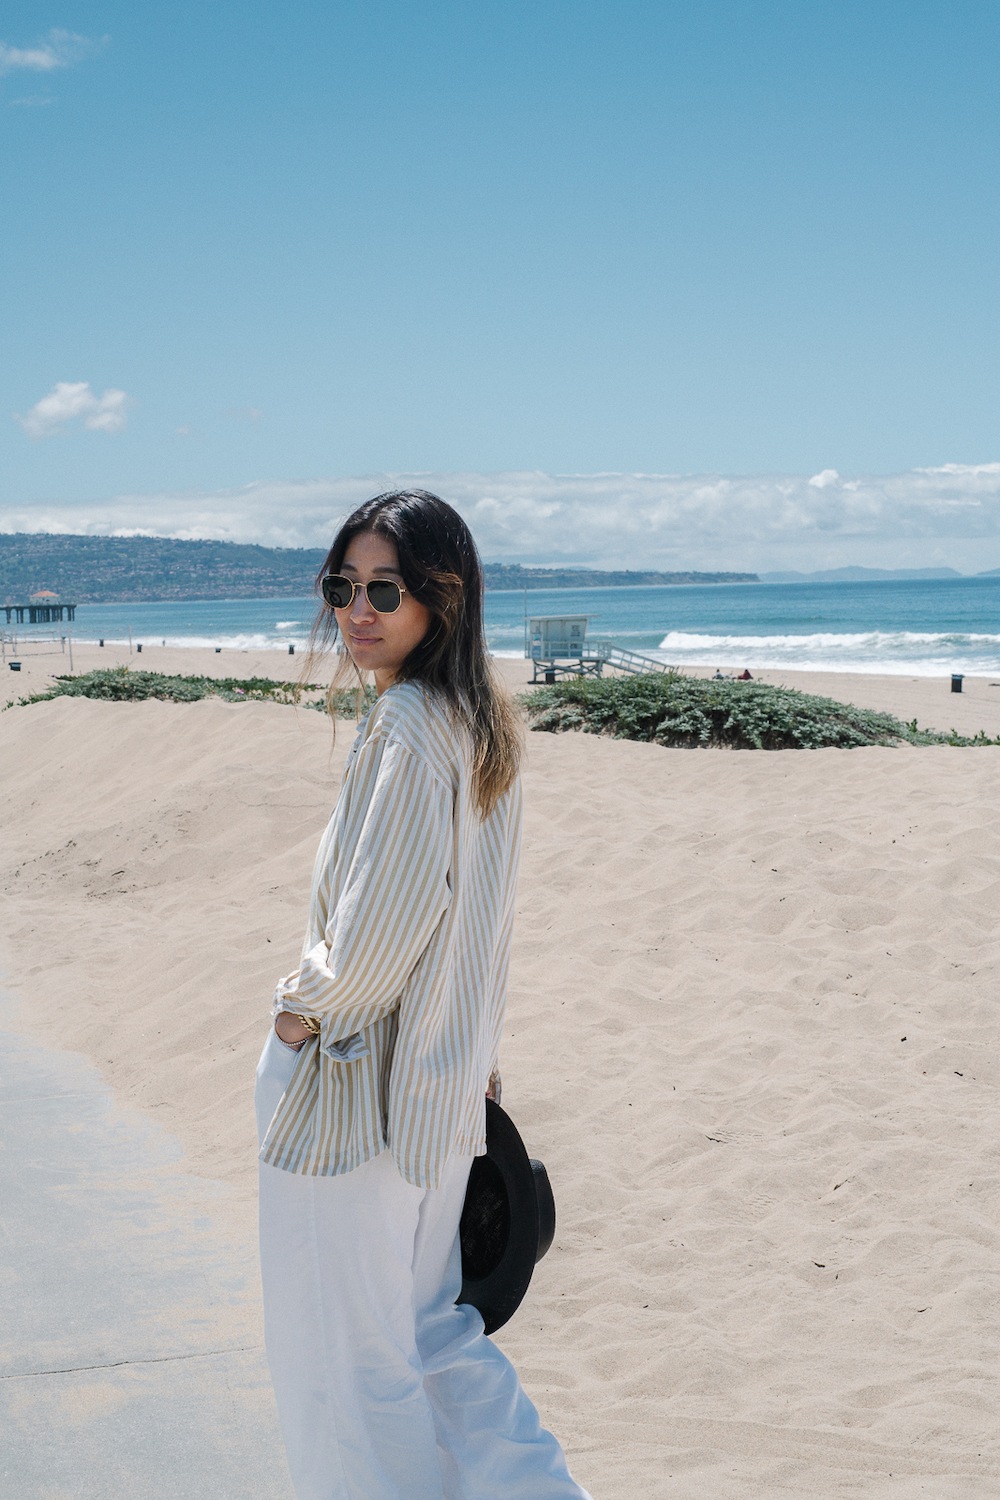 Jennie Yoon wearing white linen shirt and pants on the beach.